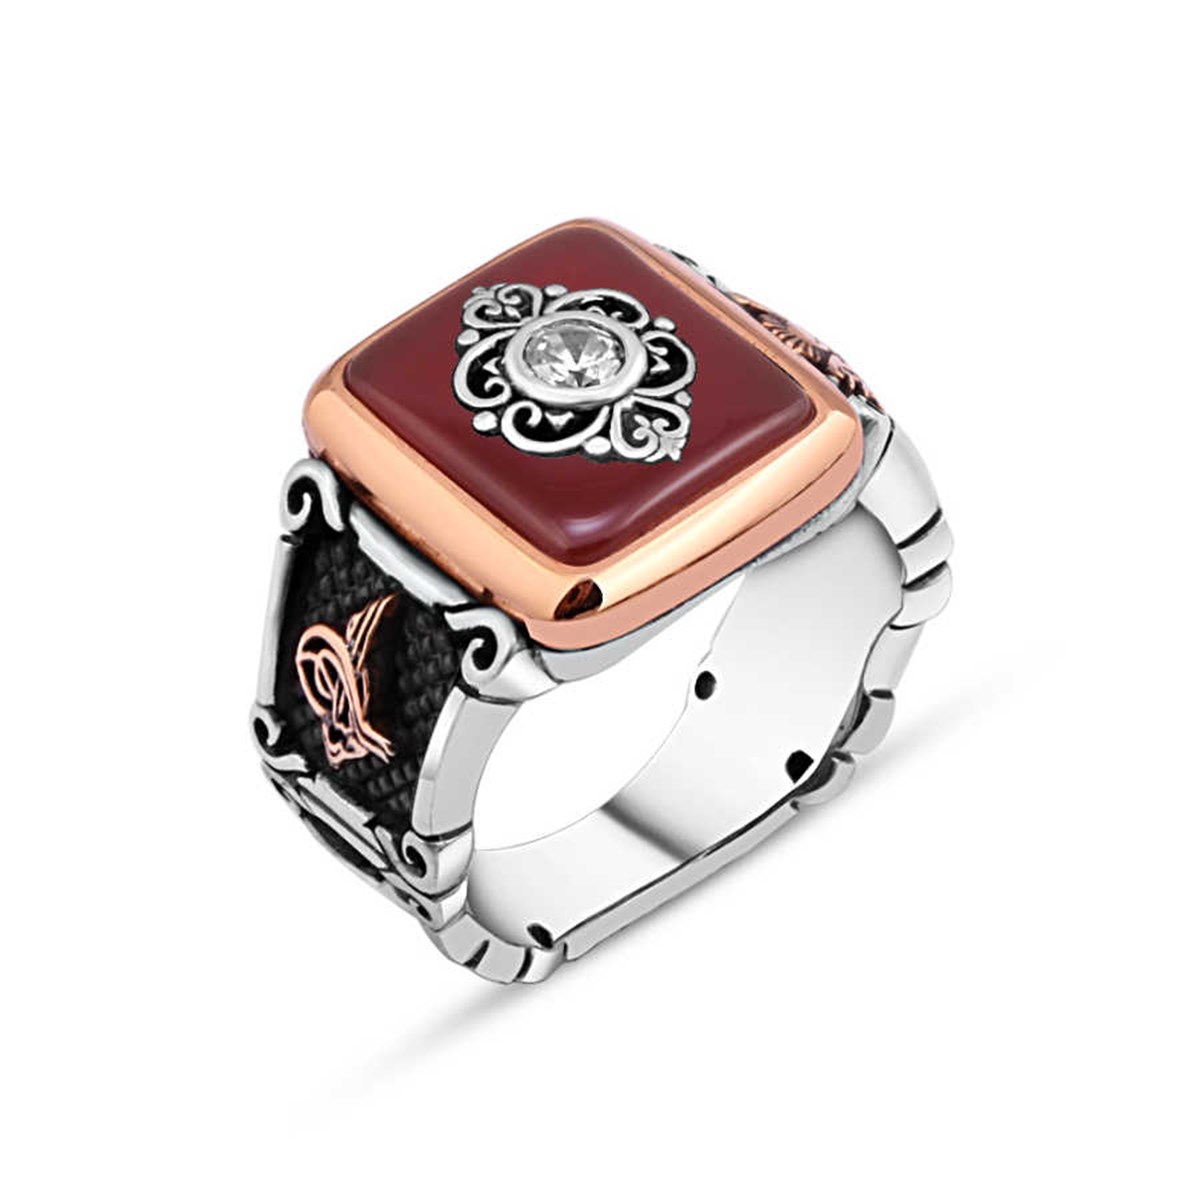 Agate Stone Middle Zircon Stone Motif Sterling Silver Men's Ring